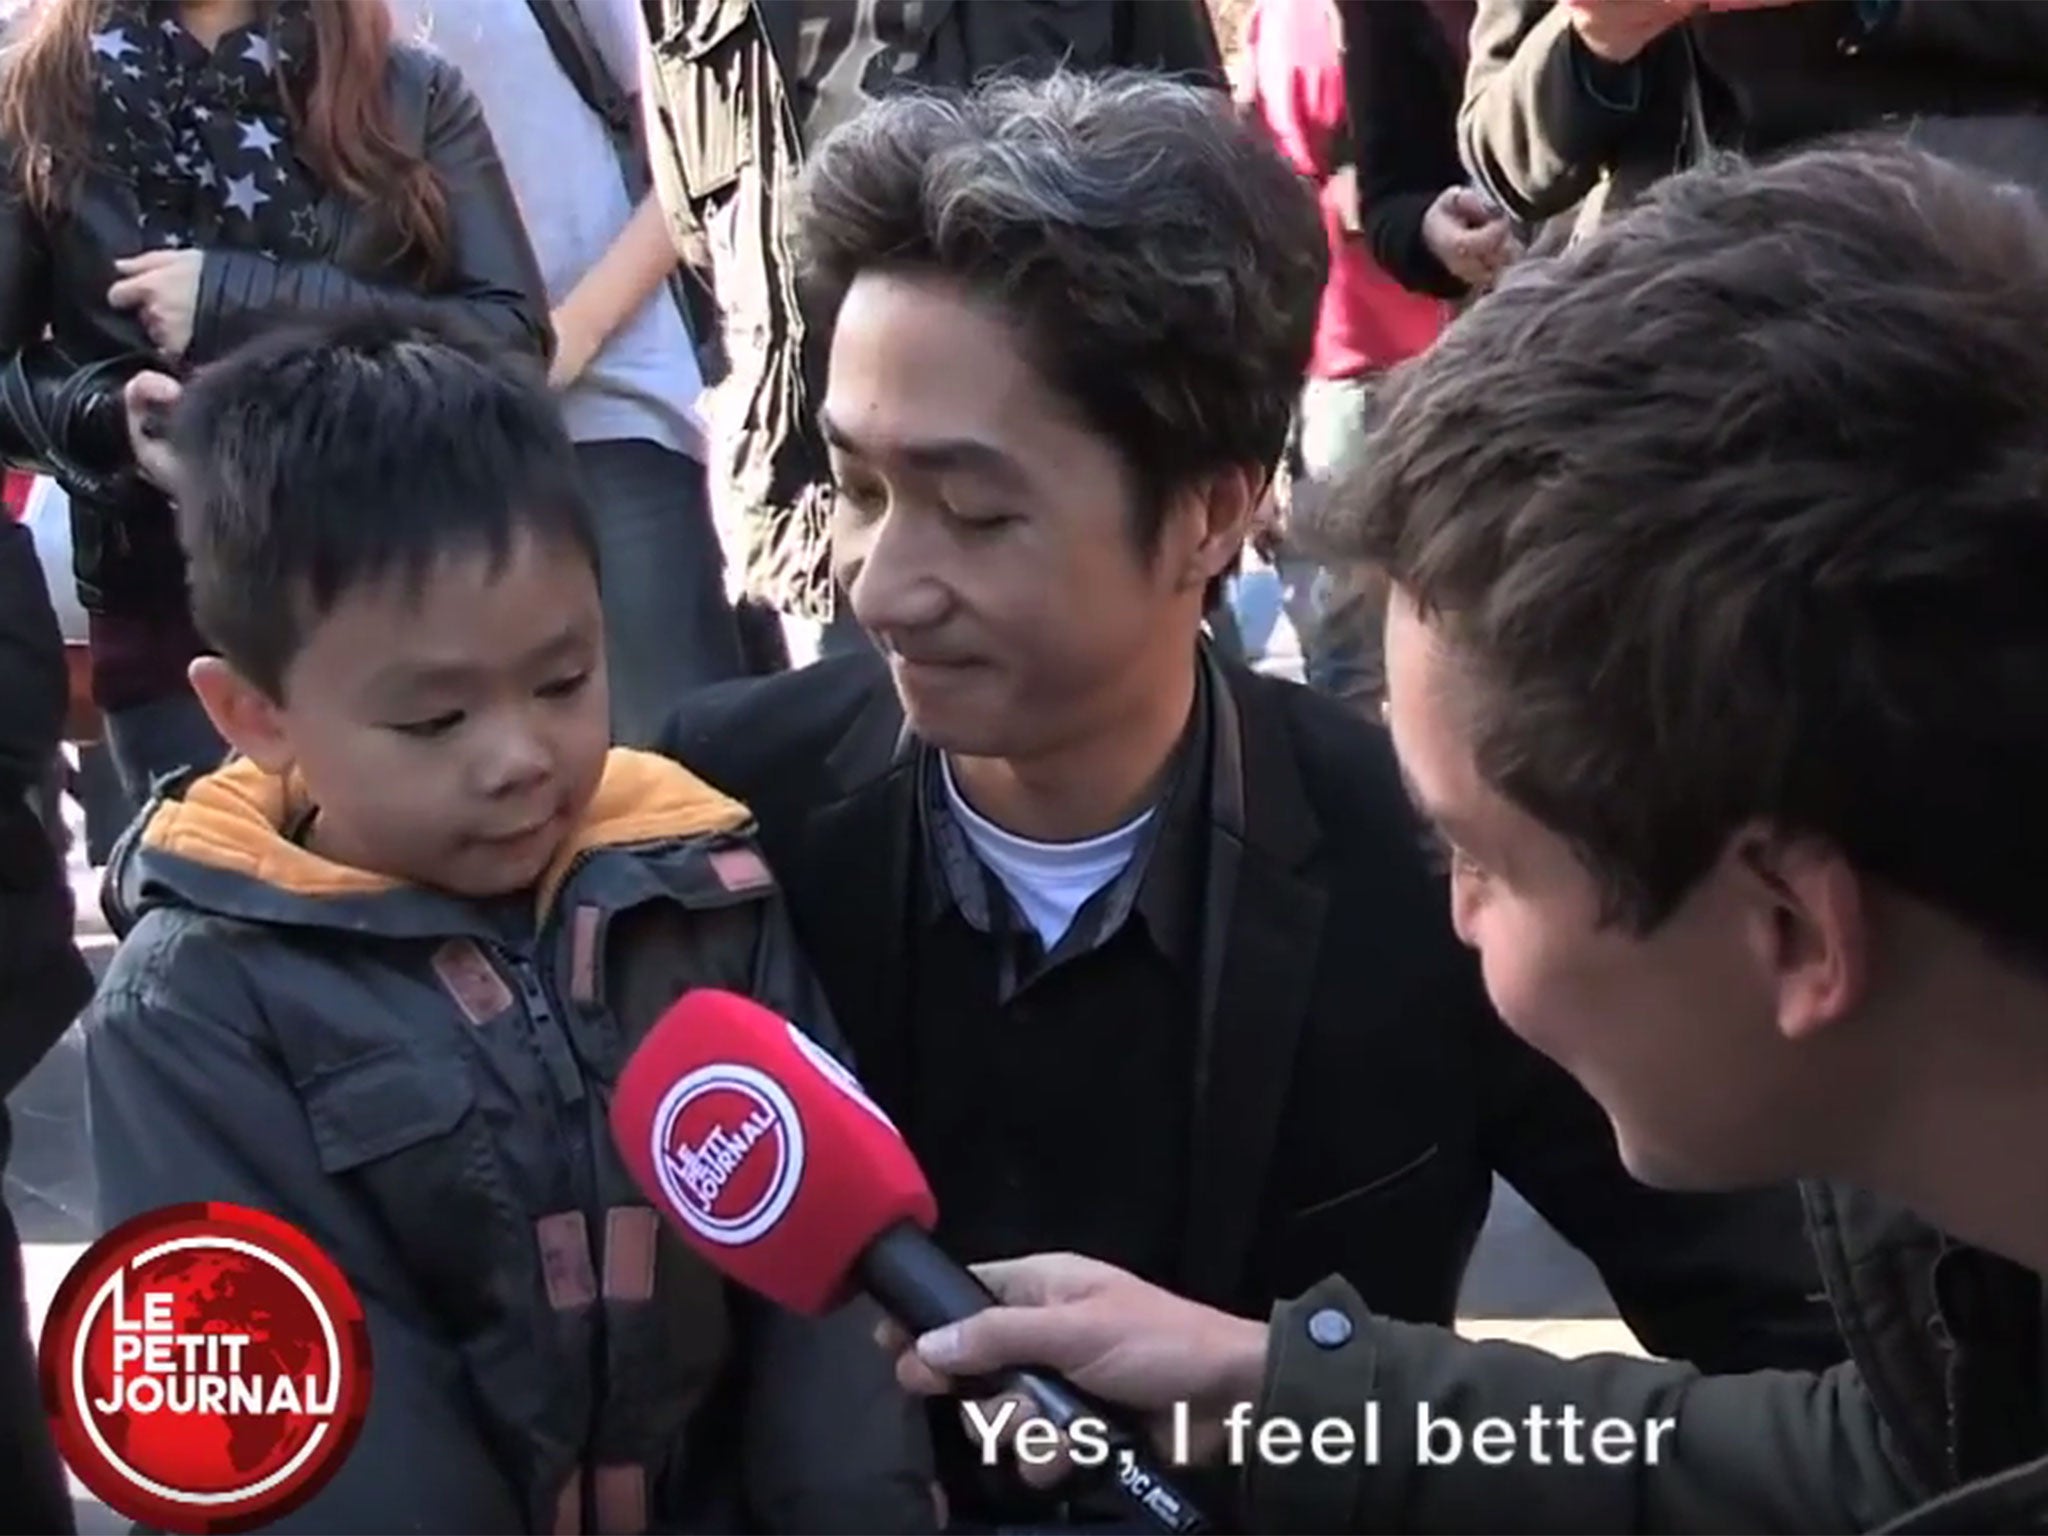 A father explains the Paris shootings to his young son